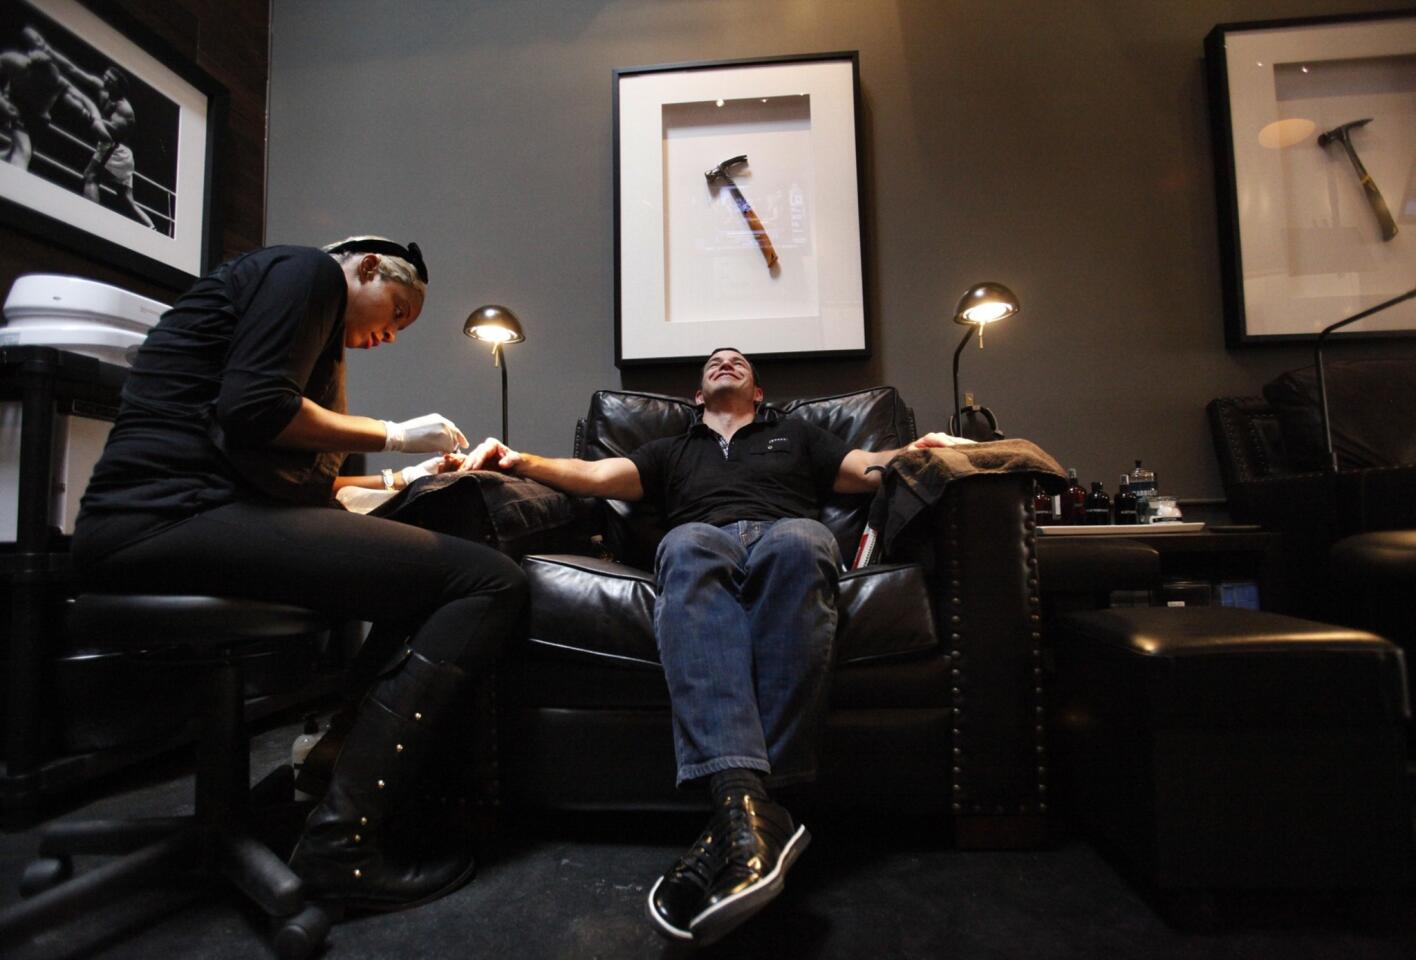 Rick Andreoli has his nails done by Naima Malone at Thursday's media opening for Hammer & Nails, which bills itself as the first nail salon for men in Los Angeles. He is editor-in-chief of knoworthy.com.